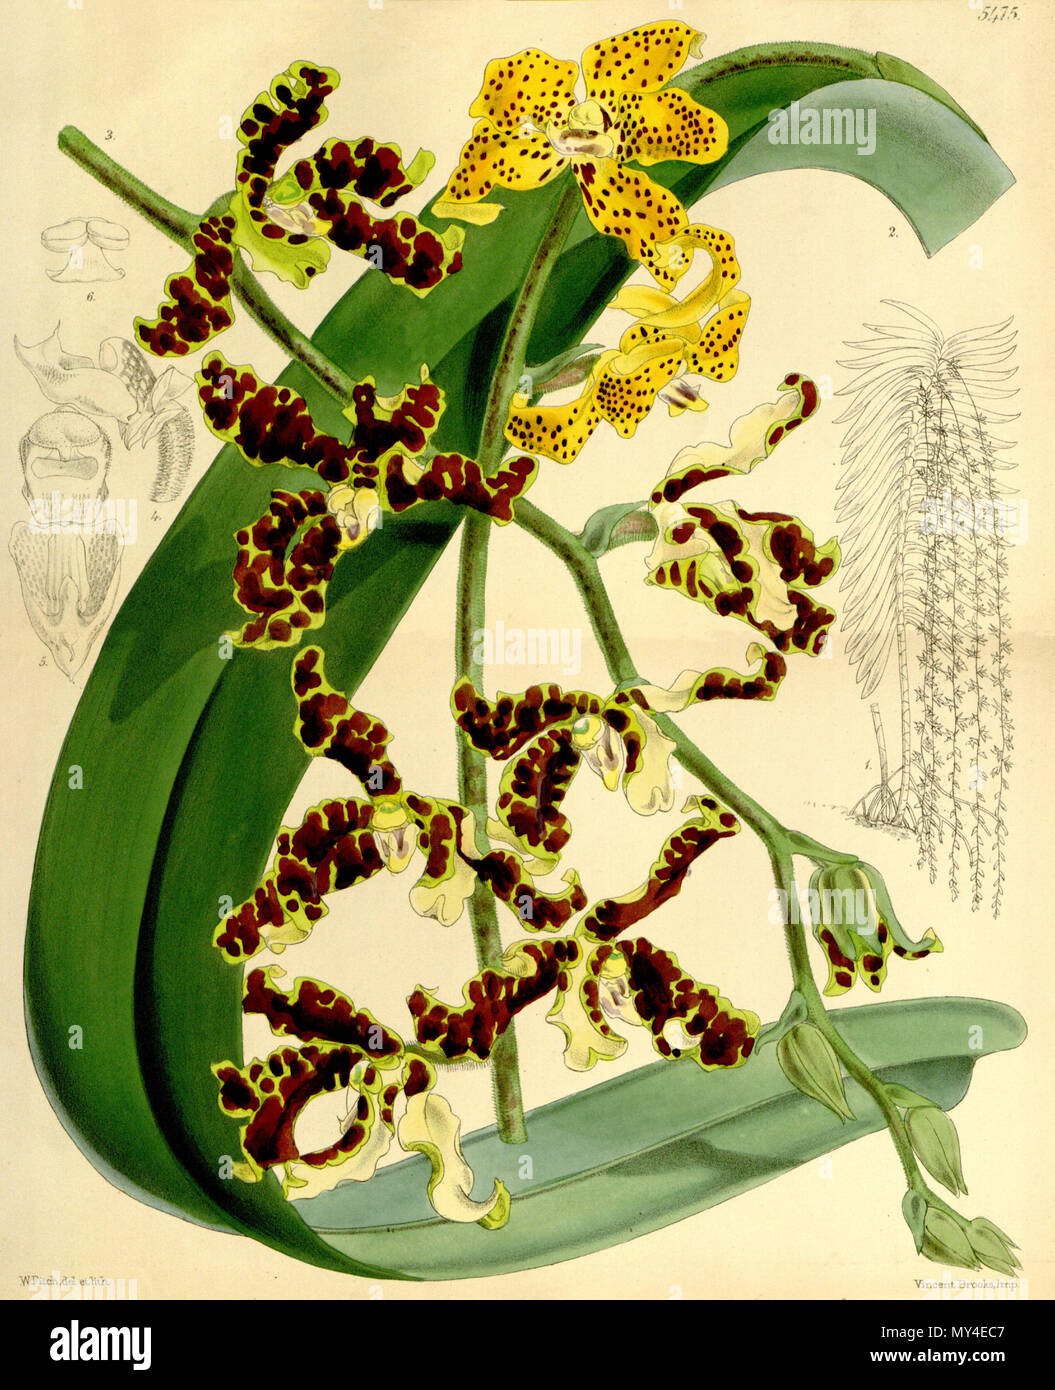 . Illustration of Dimorphorchis lowii ( or Renanthera lowii) . 1864. Walter Hood Fitch (1817-1892) del. et lith. Description by William Jackson Hooker (1785—1865) 141 Dimorphorchis lowii (Renanthera lowii) - Curtis' 90 (Ser. 3 no. 20) pl. 5475 (1864) Stock Photo